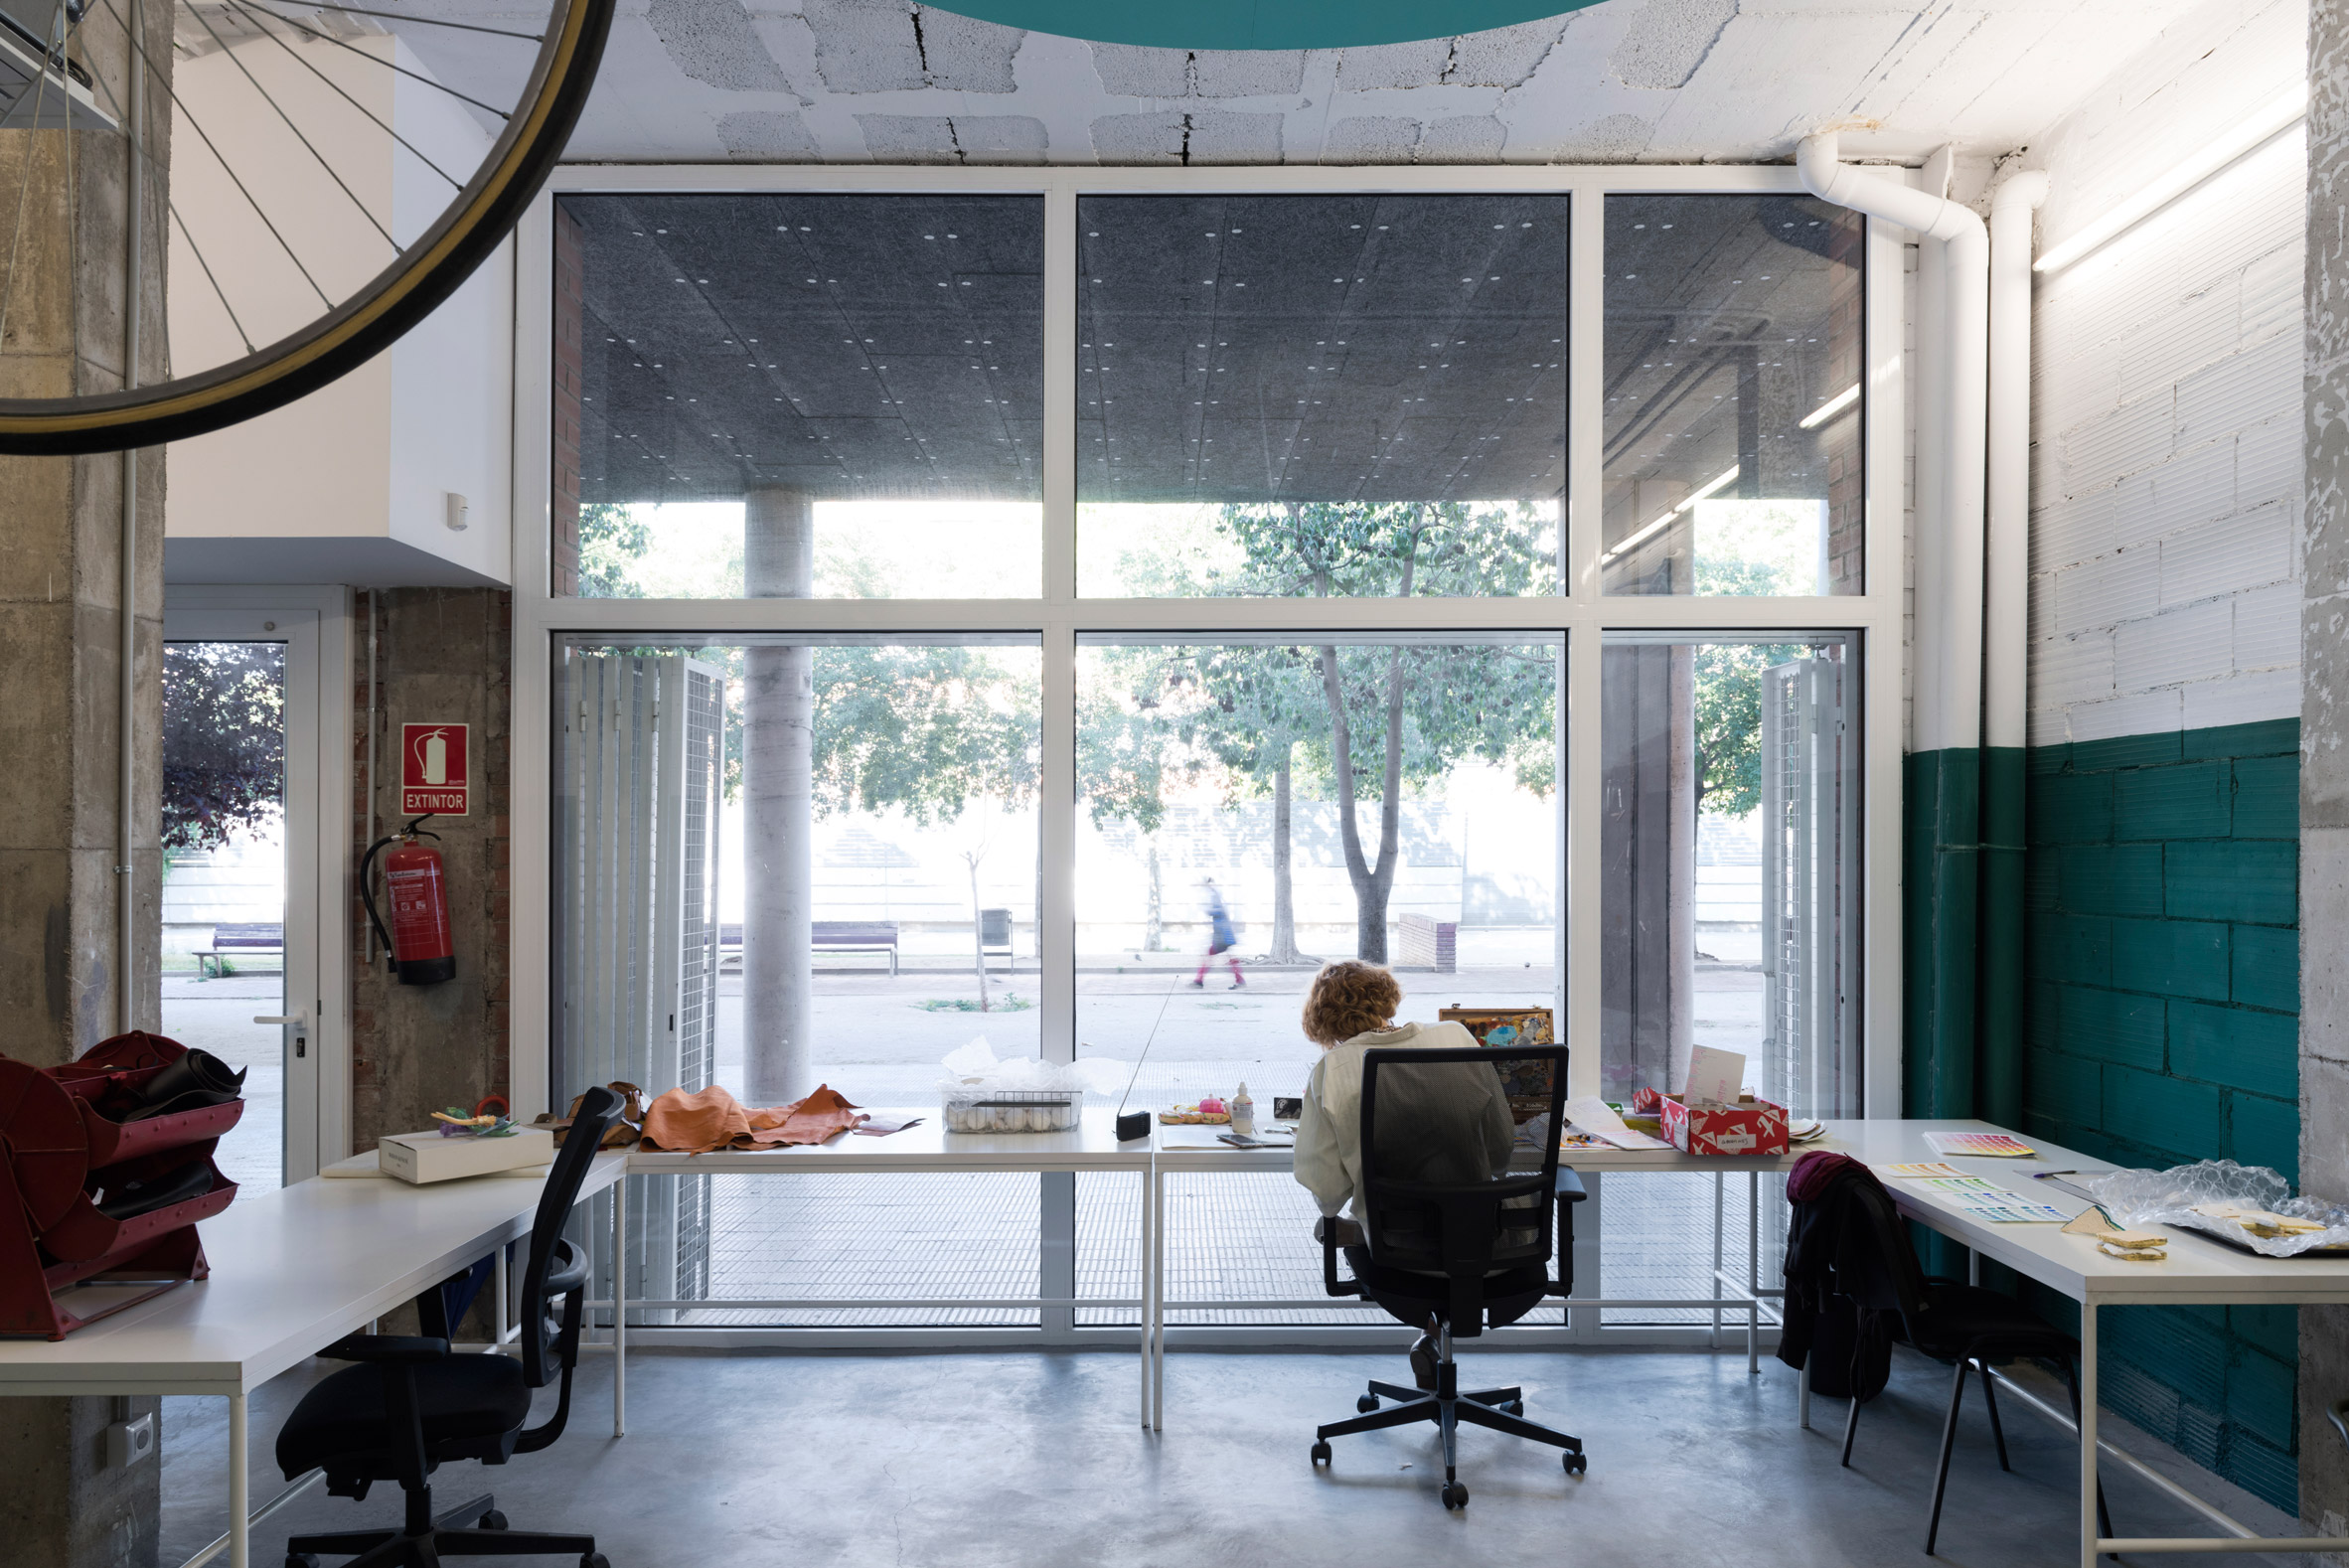 Sinergics Co Working Spaces In Barcelona Showcase Low Budget